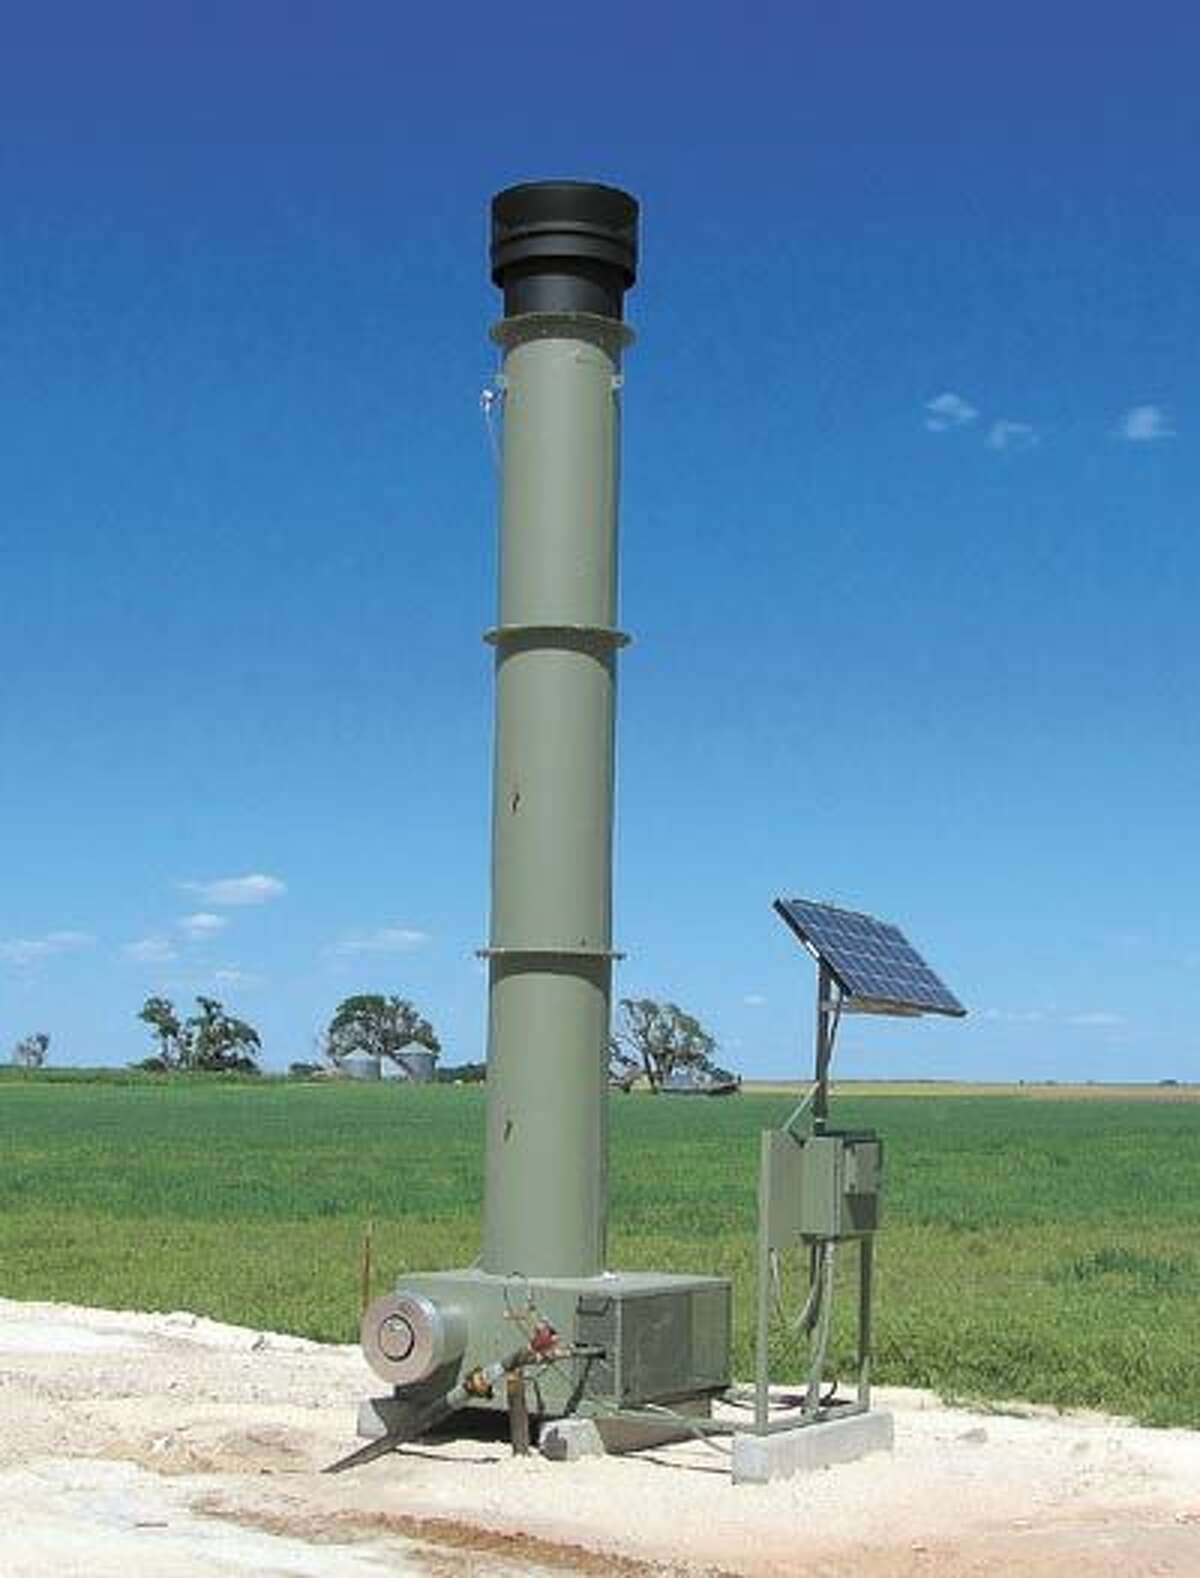 When gas amounts are small and/or pipelines are distant, flaring may be your only option. Kimark’s SmartFlare system is perfect for small or large gas flows in local or remote applications. Call Kimark today at (817) 416-8881 or (432) 270-4157 to learn more.